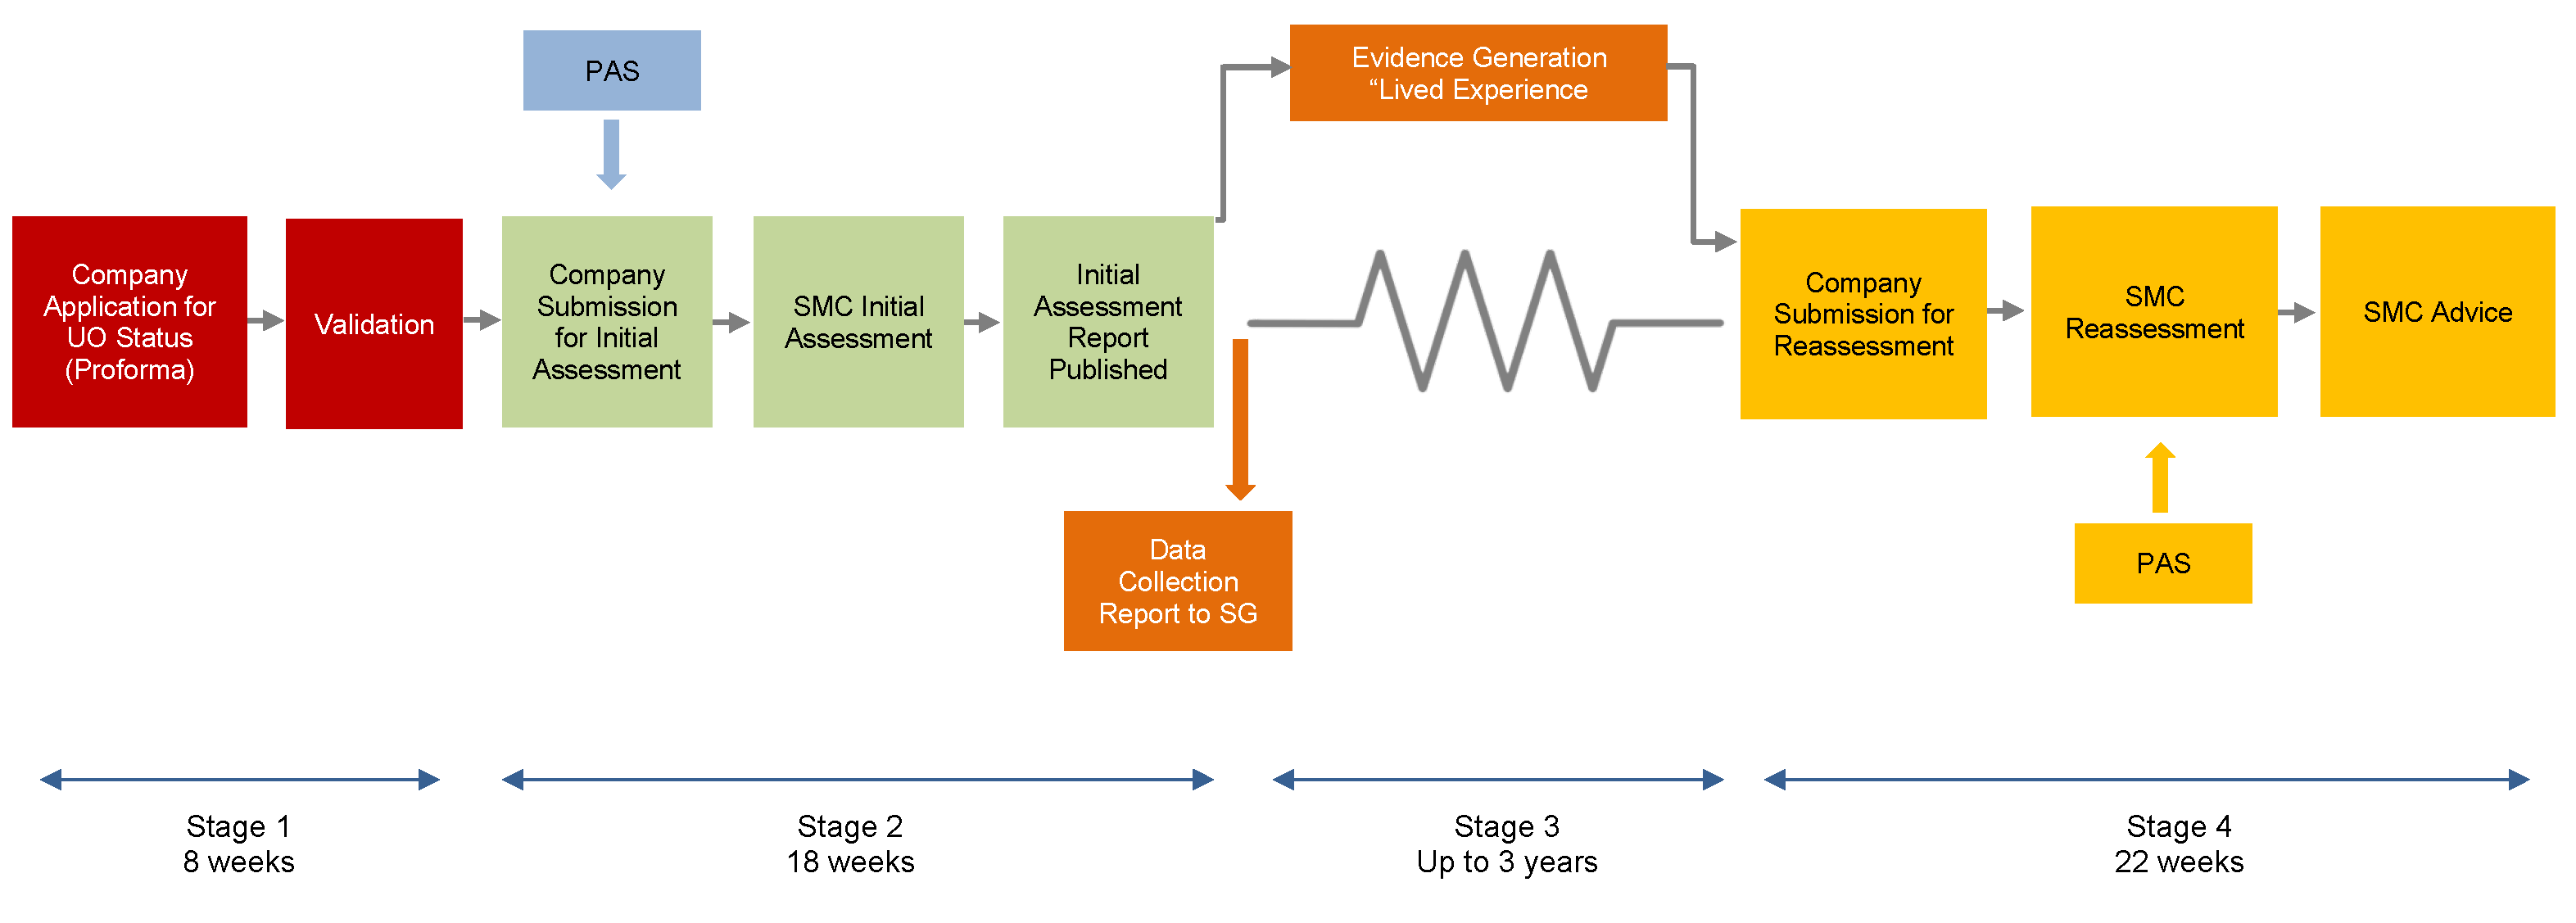 Figure depicts the new 4-stage process for renewing ultra-orphan drugs by the SMC.